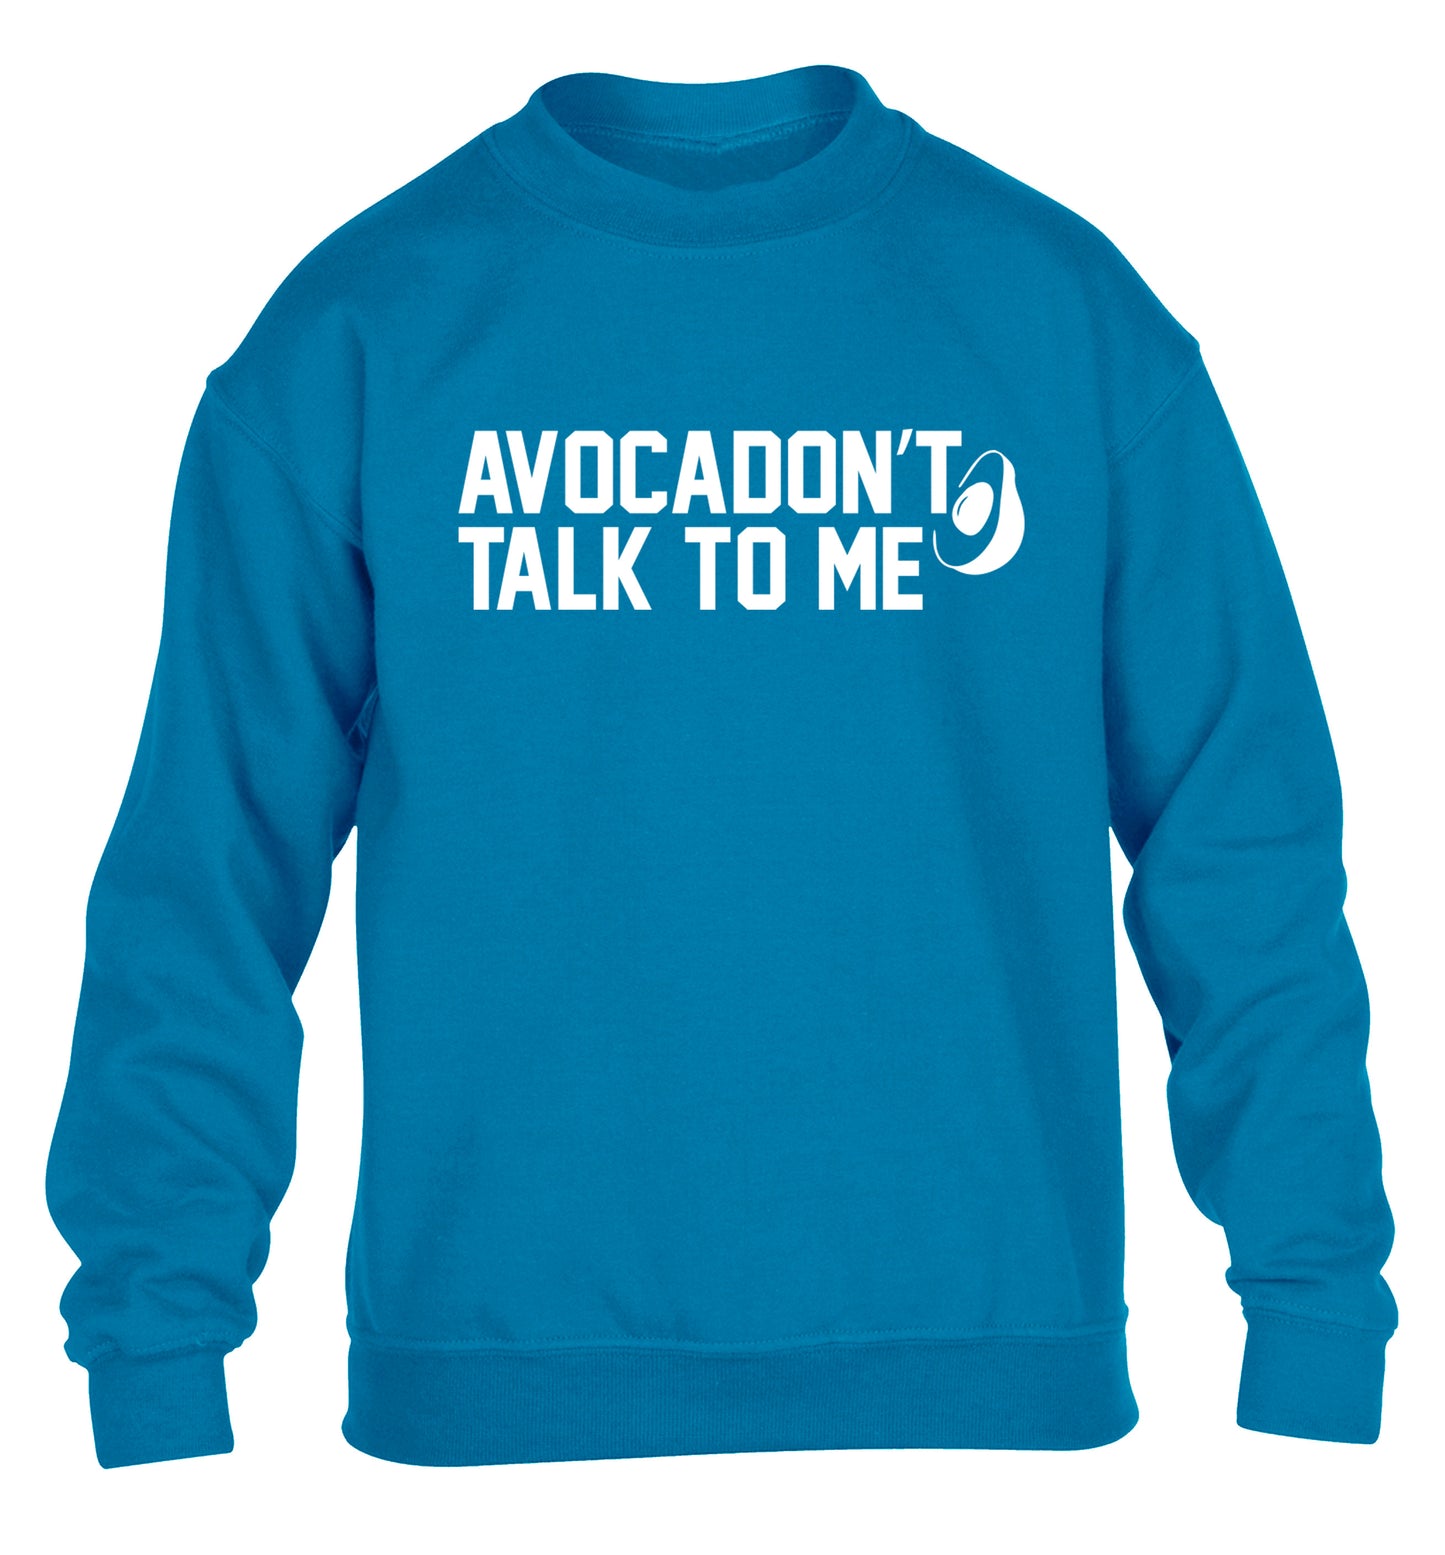 Avocadon't talk to me children's blue sweater 12-14 Years